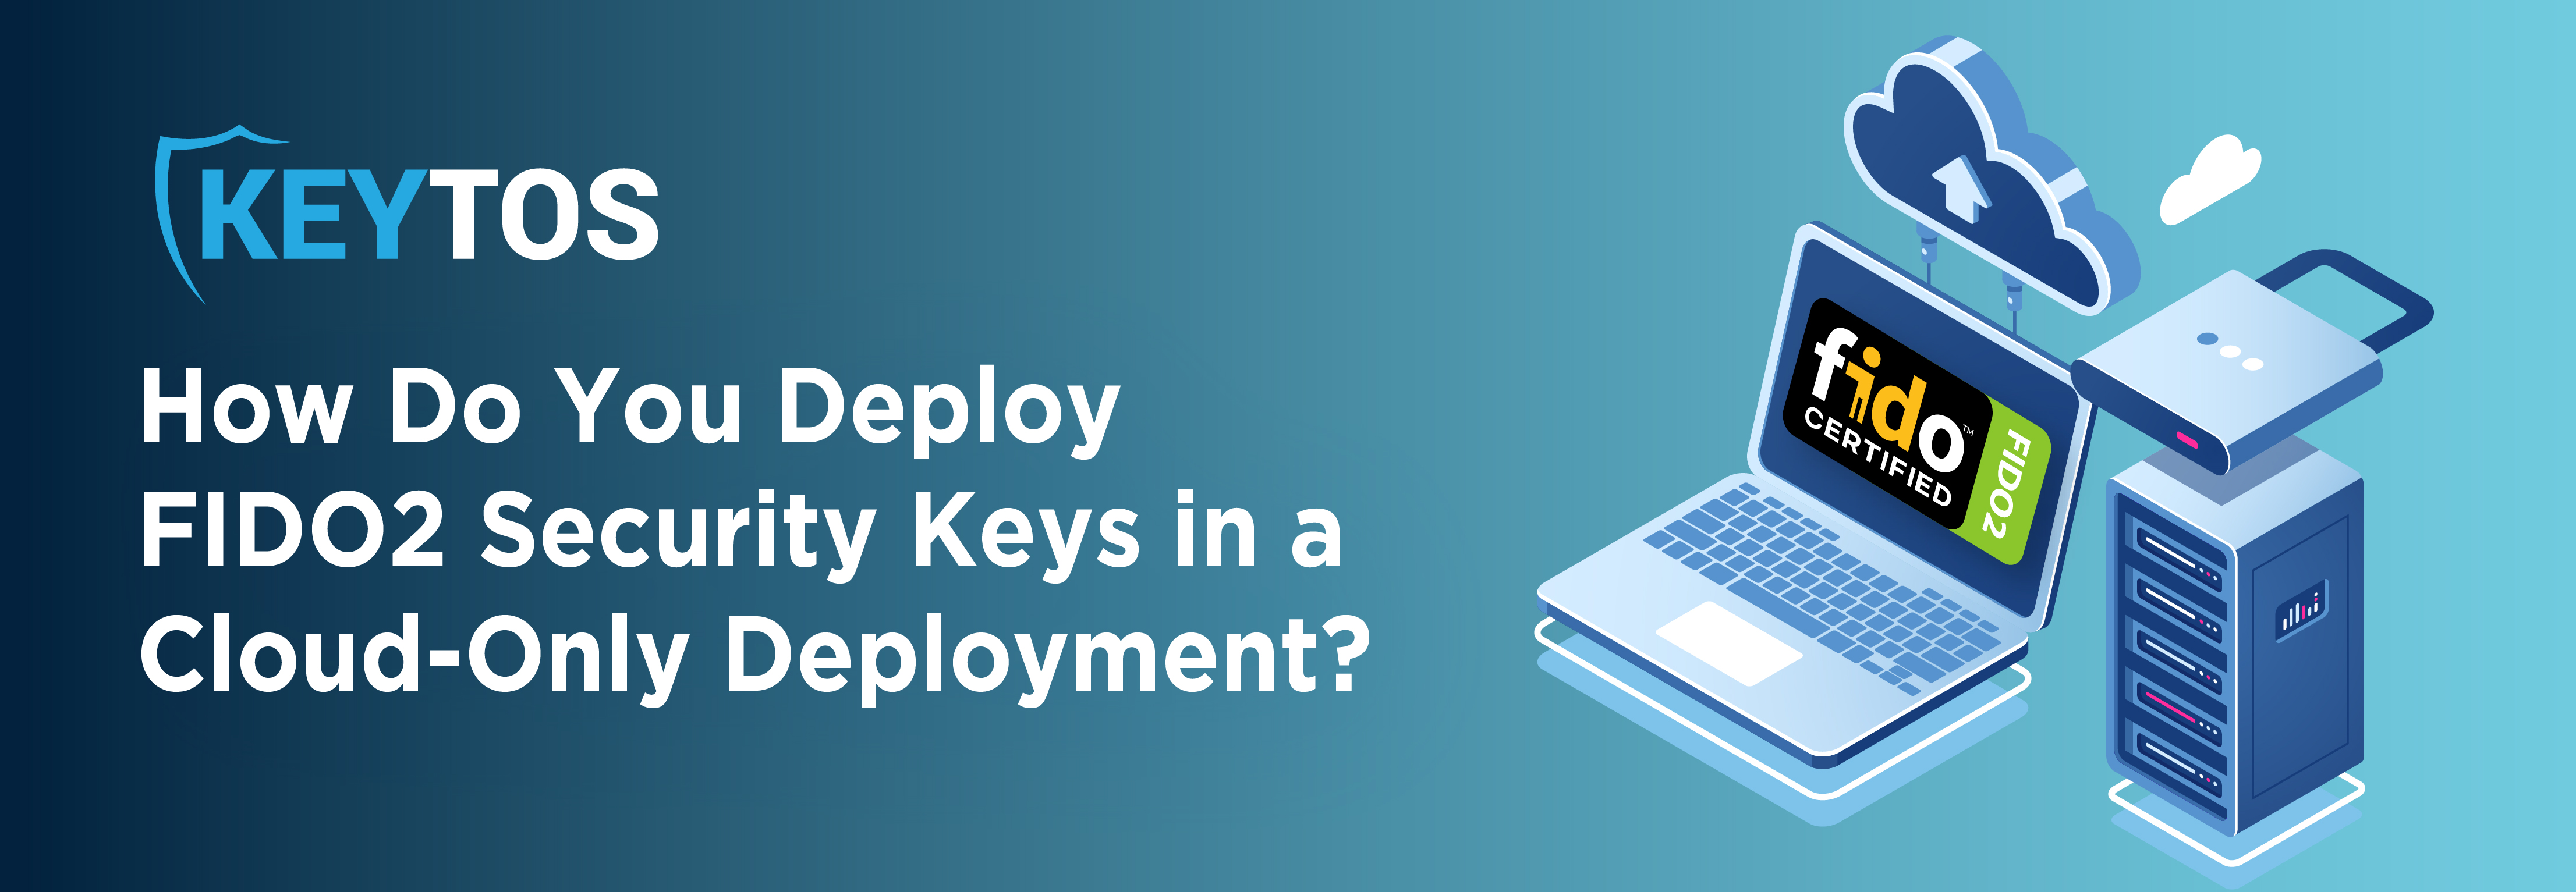 How to Deploy FIDO2 Keys in a Cloud Only Deployment